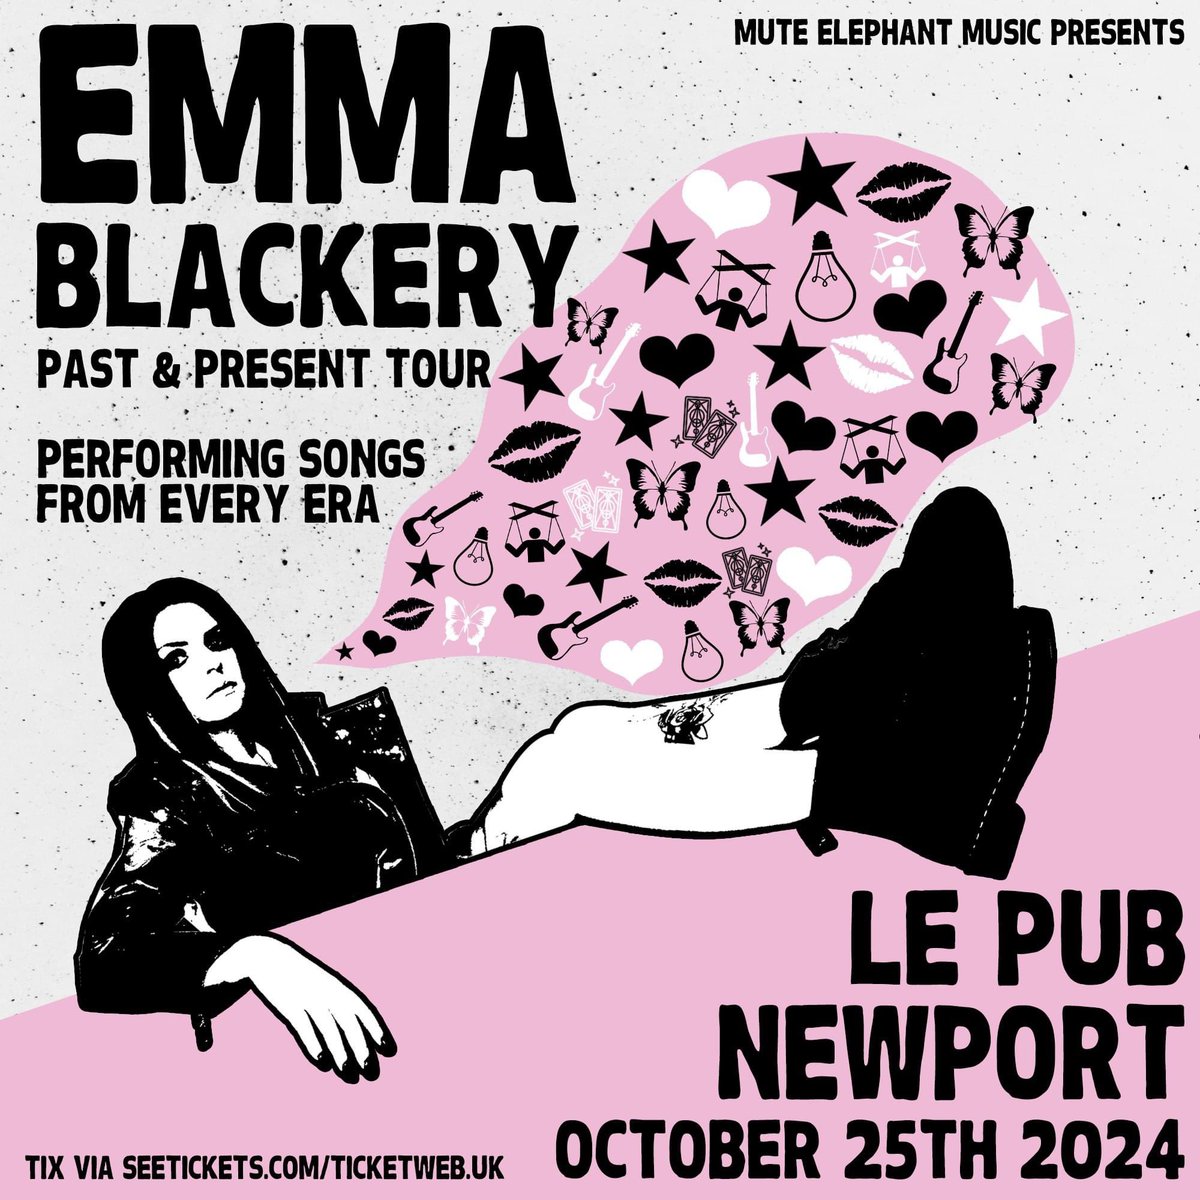 😍 Just announced! 😍 @emmablackery is coming to Le Pub on 25th October 2024 😁 With a musical career spanning over ten years, Emma will be performing songs from every release for the very first time on the all-new Past & Present tour. After creating her YouTube channel in